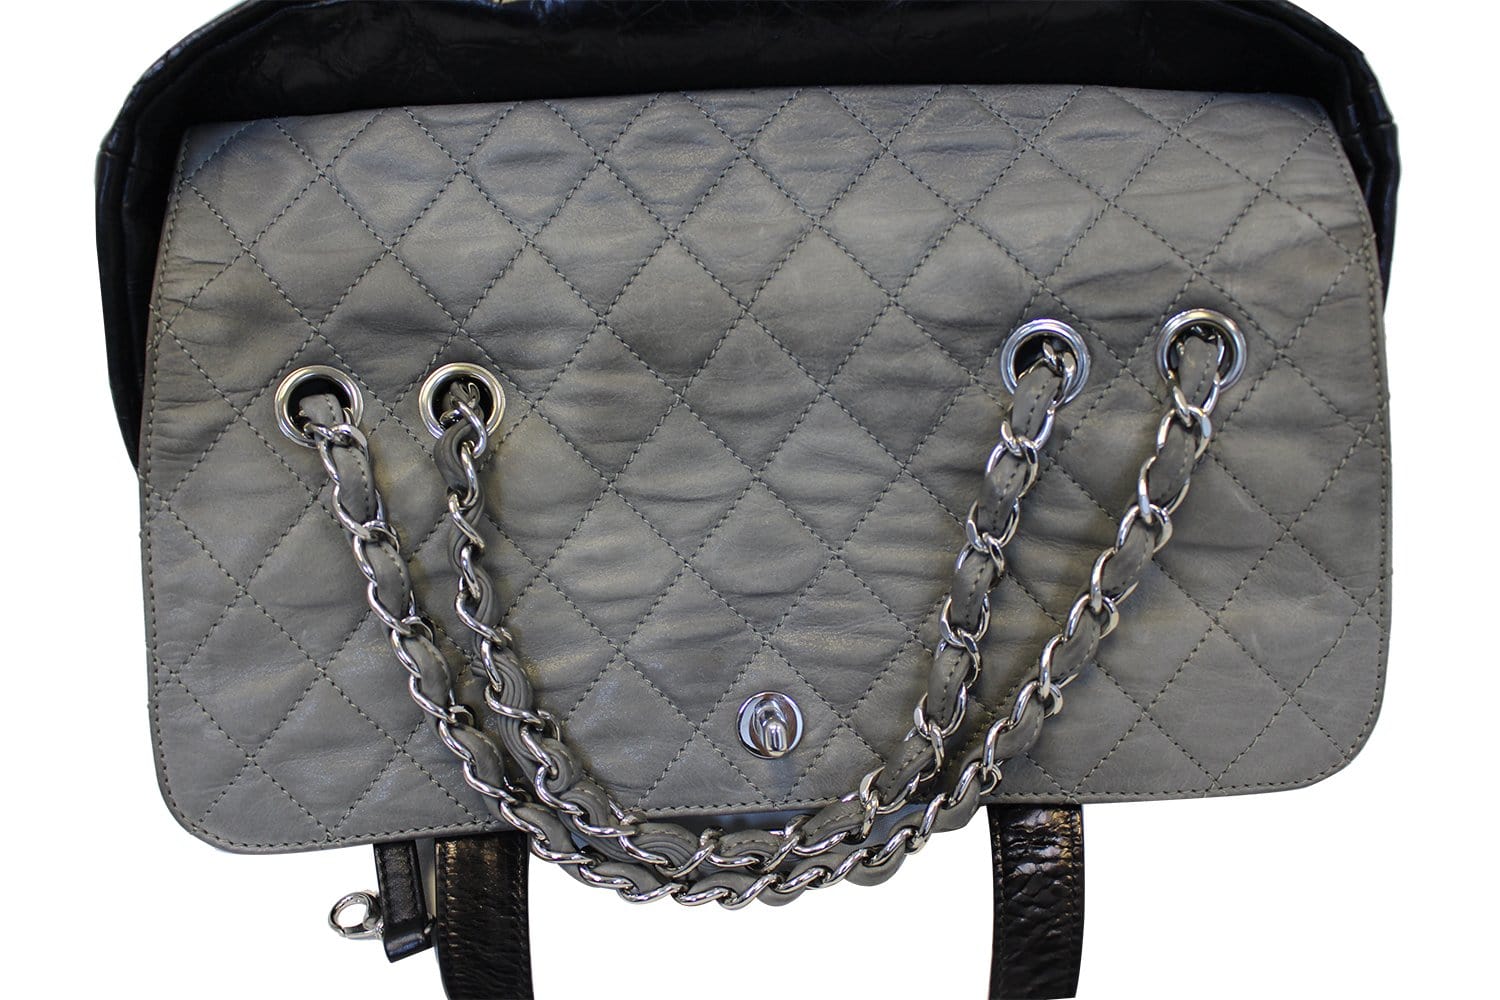 Chanel On the Road Large tote